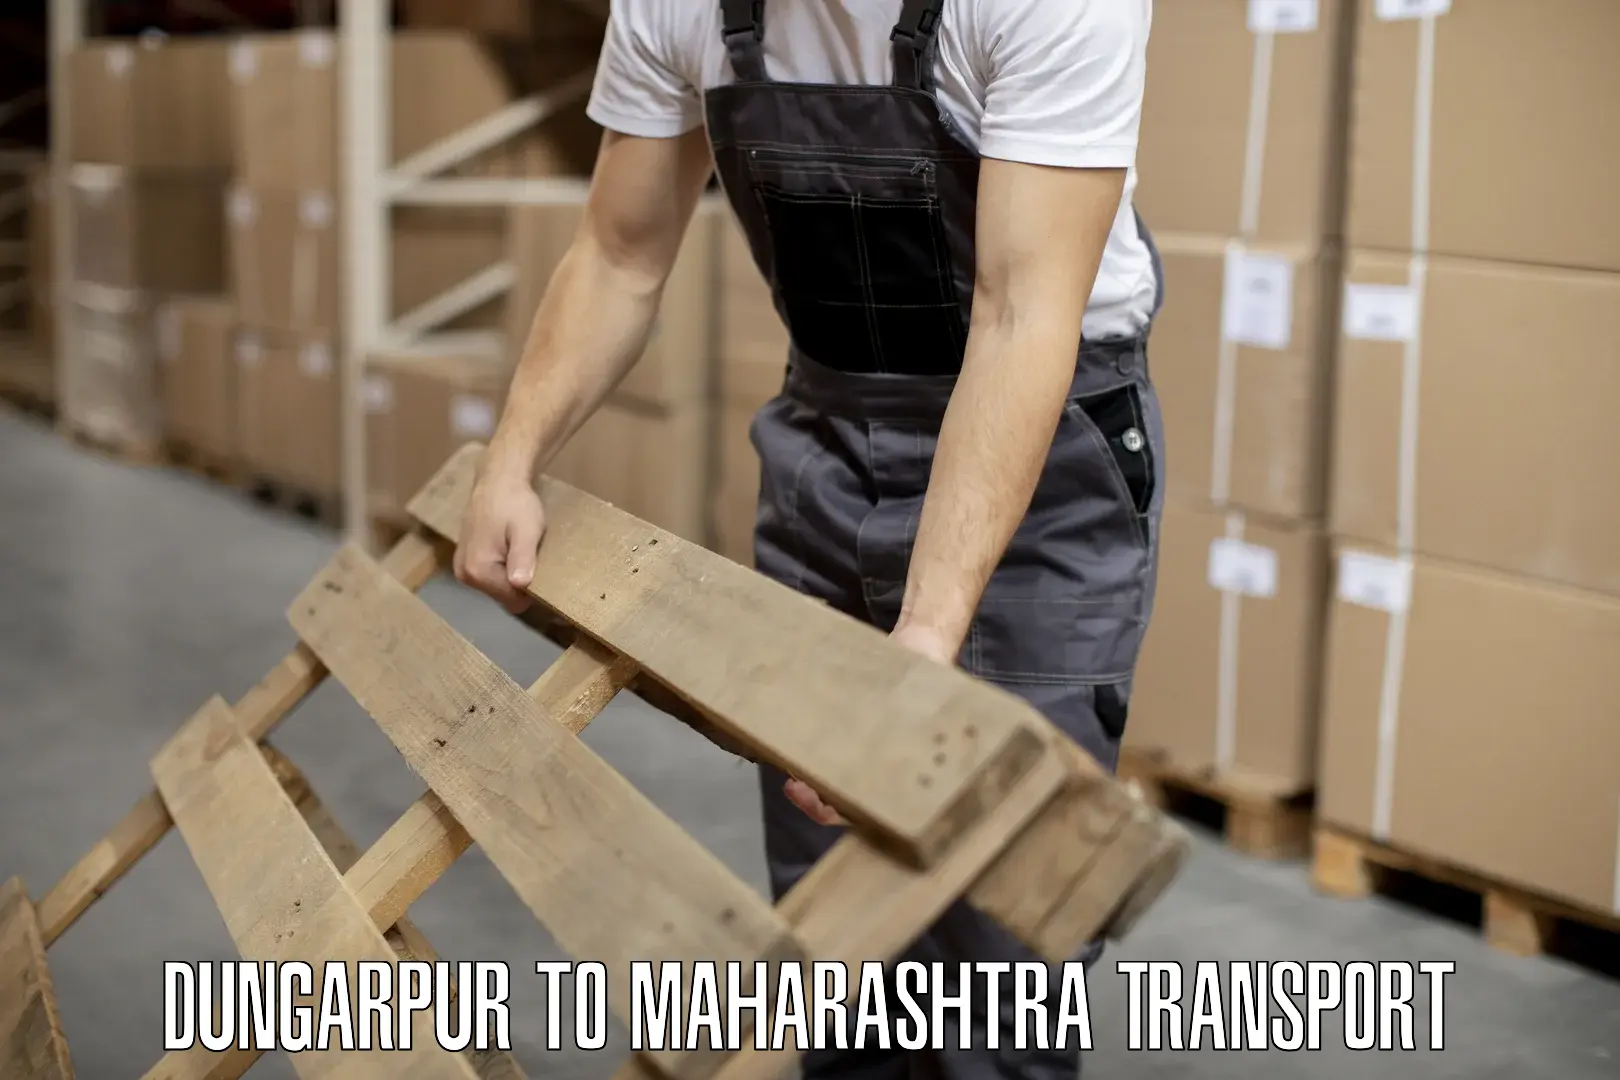 Container transport service Dungarpur to Andheri